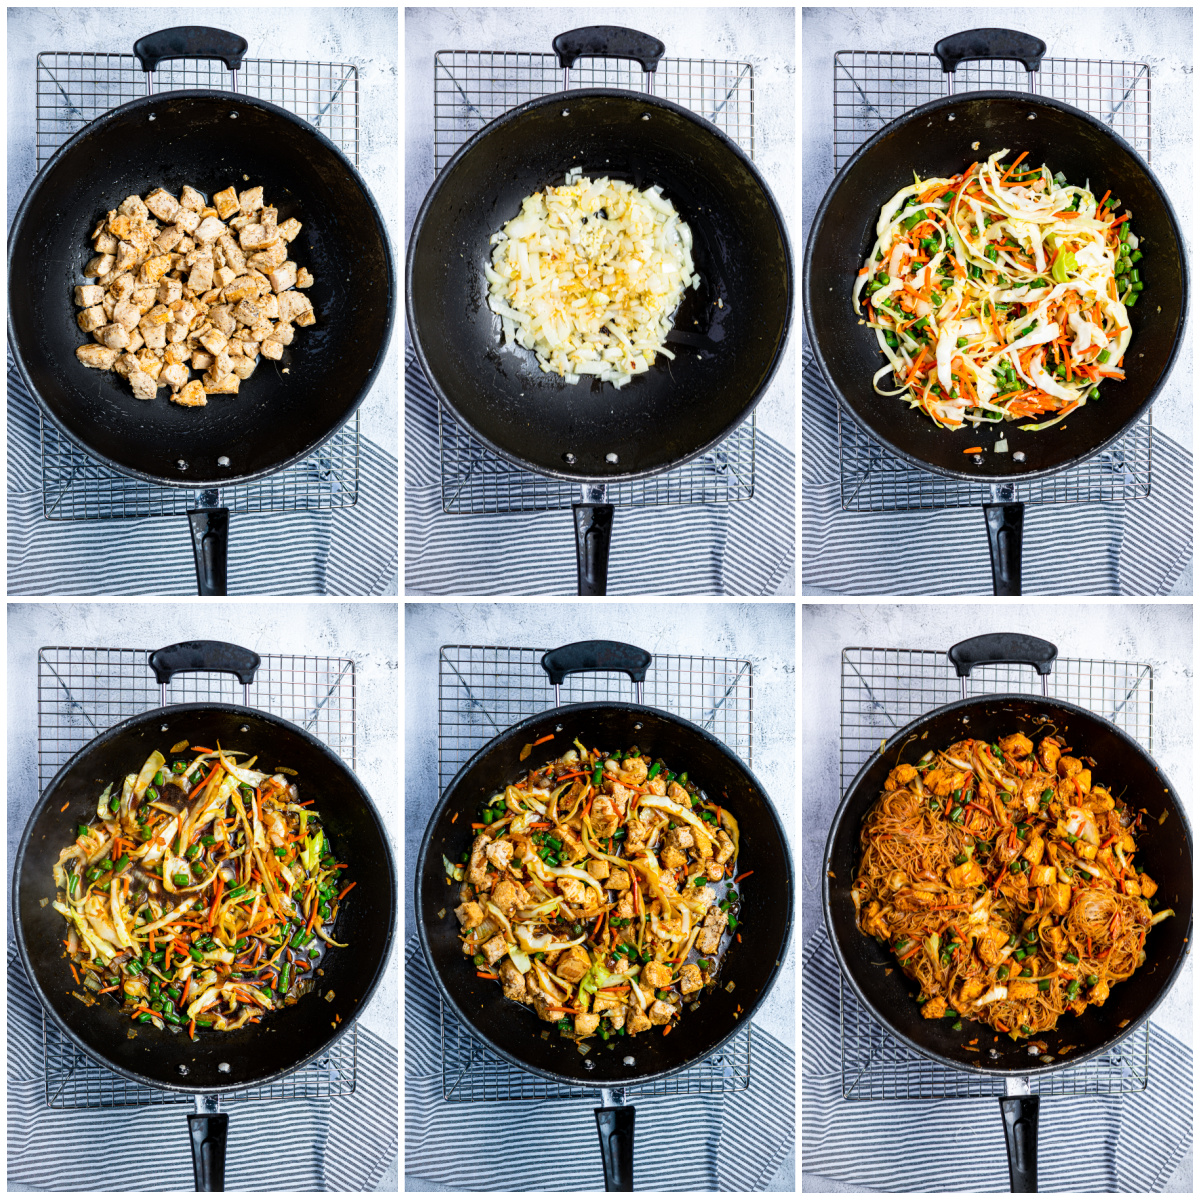 Step by step photos on how to make a Pancit Recipe.